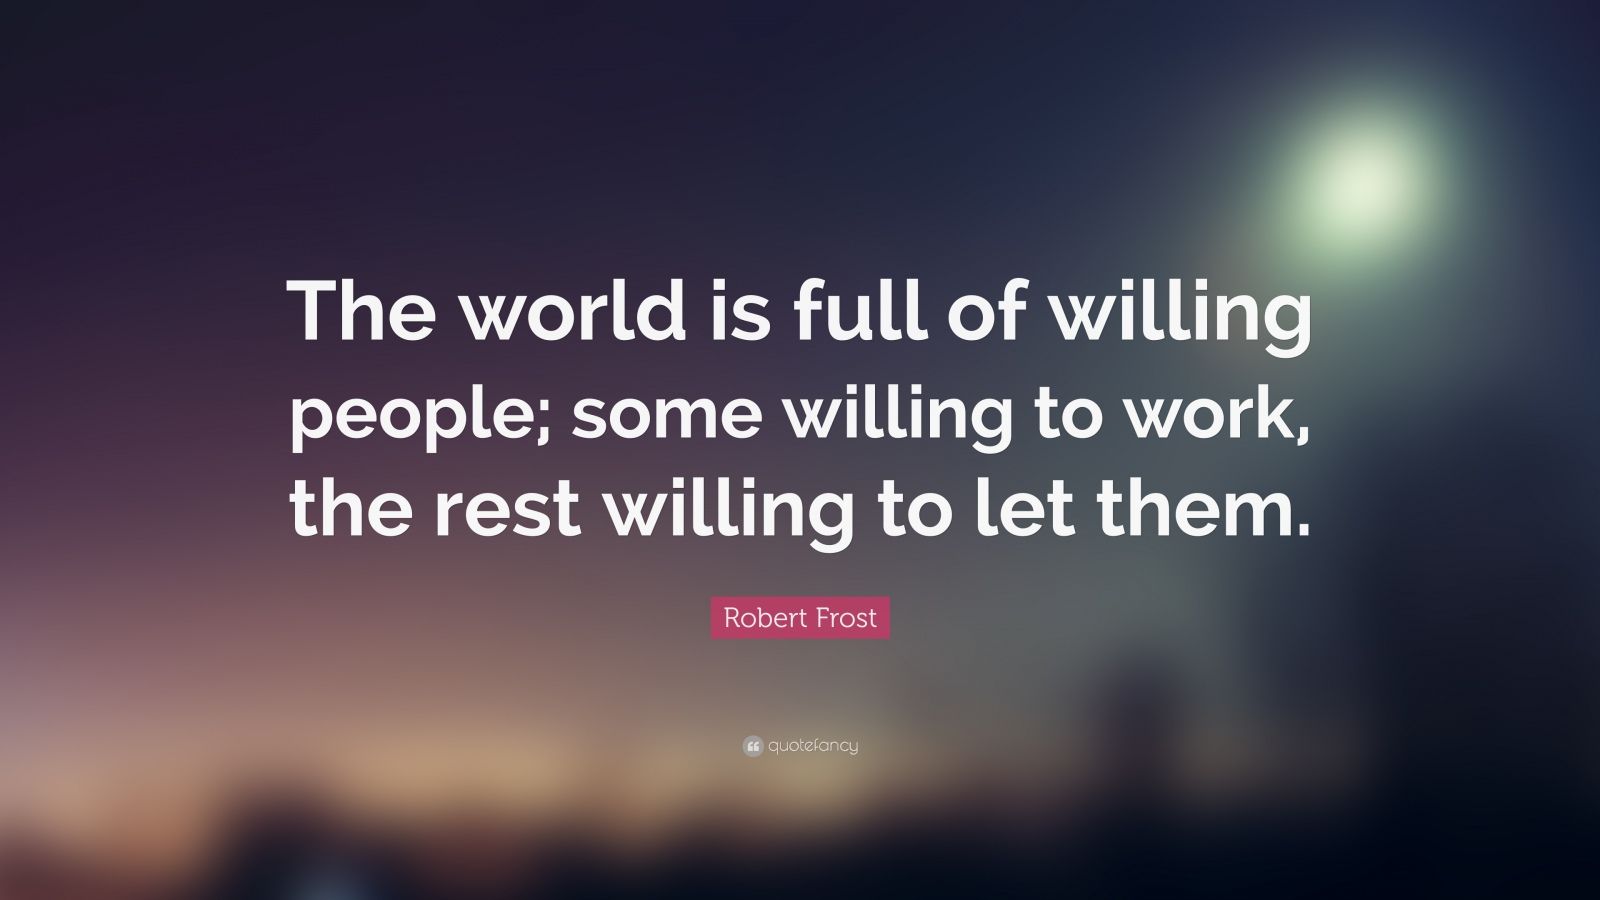 Robert Frost Quote: “The world is full of willing people; some willing ...